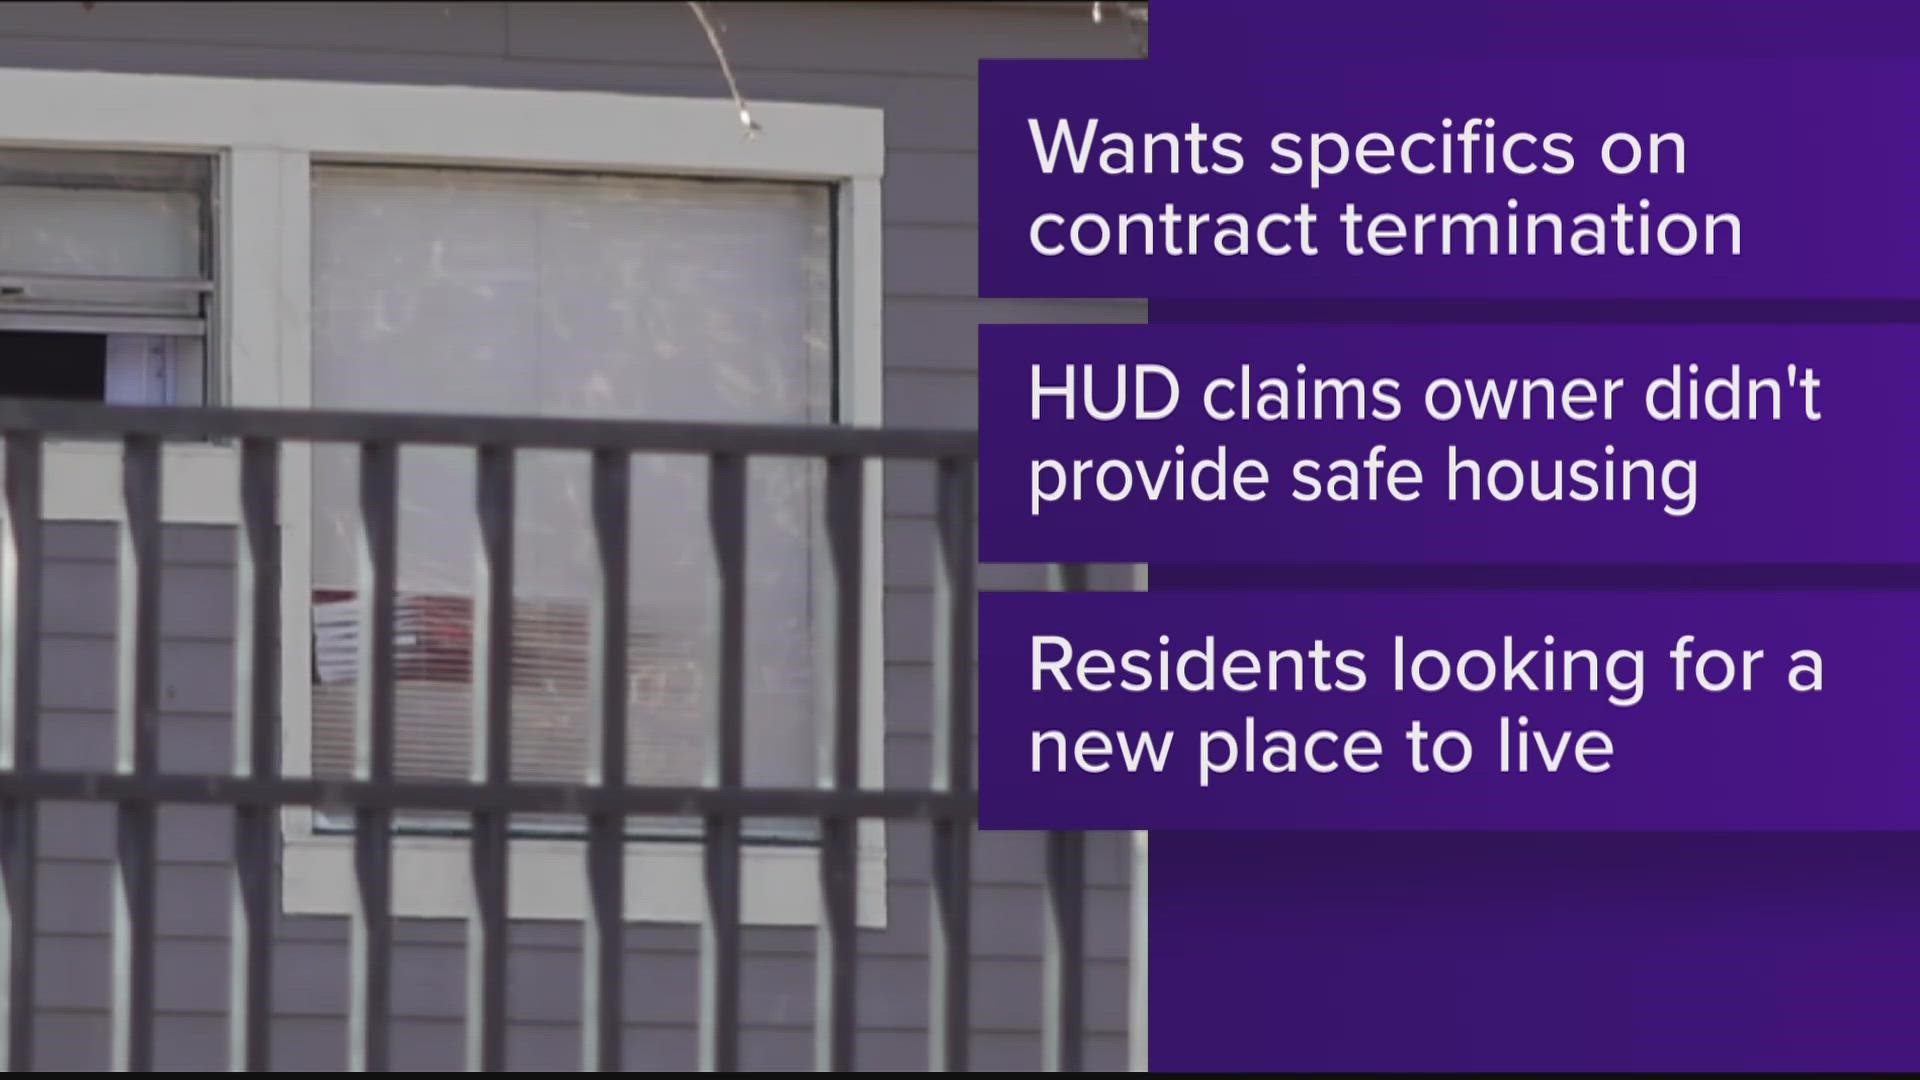 The Inspector General of the U.S. Department of Housing and Urban Development (HUD) said Tuesday that she has ordered a review of why HUD ended its contract.